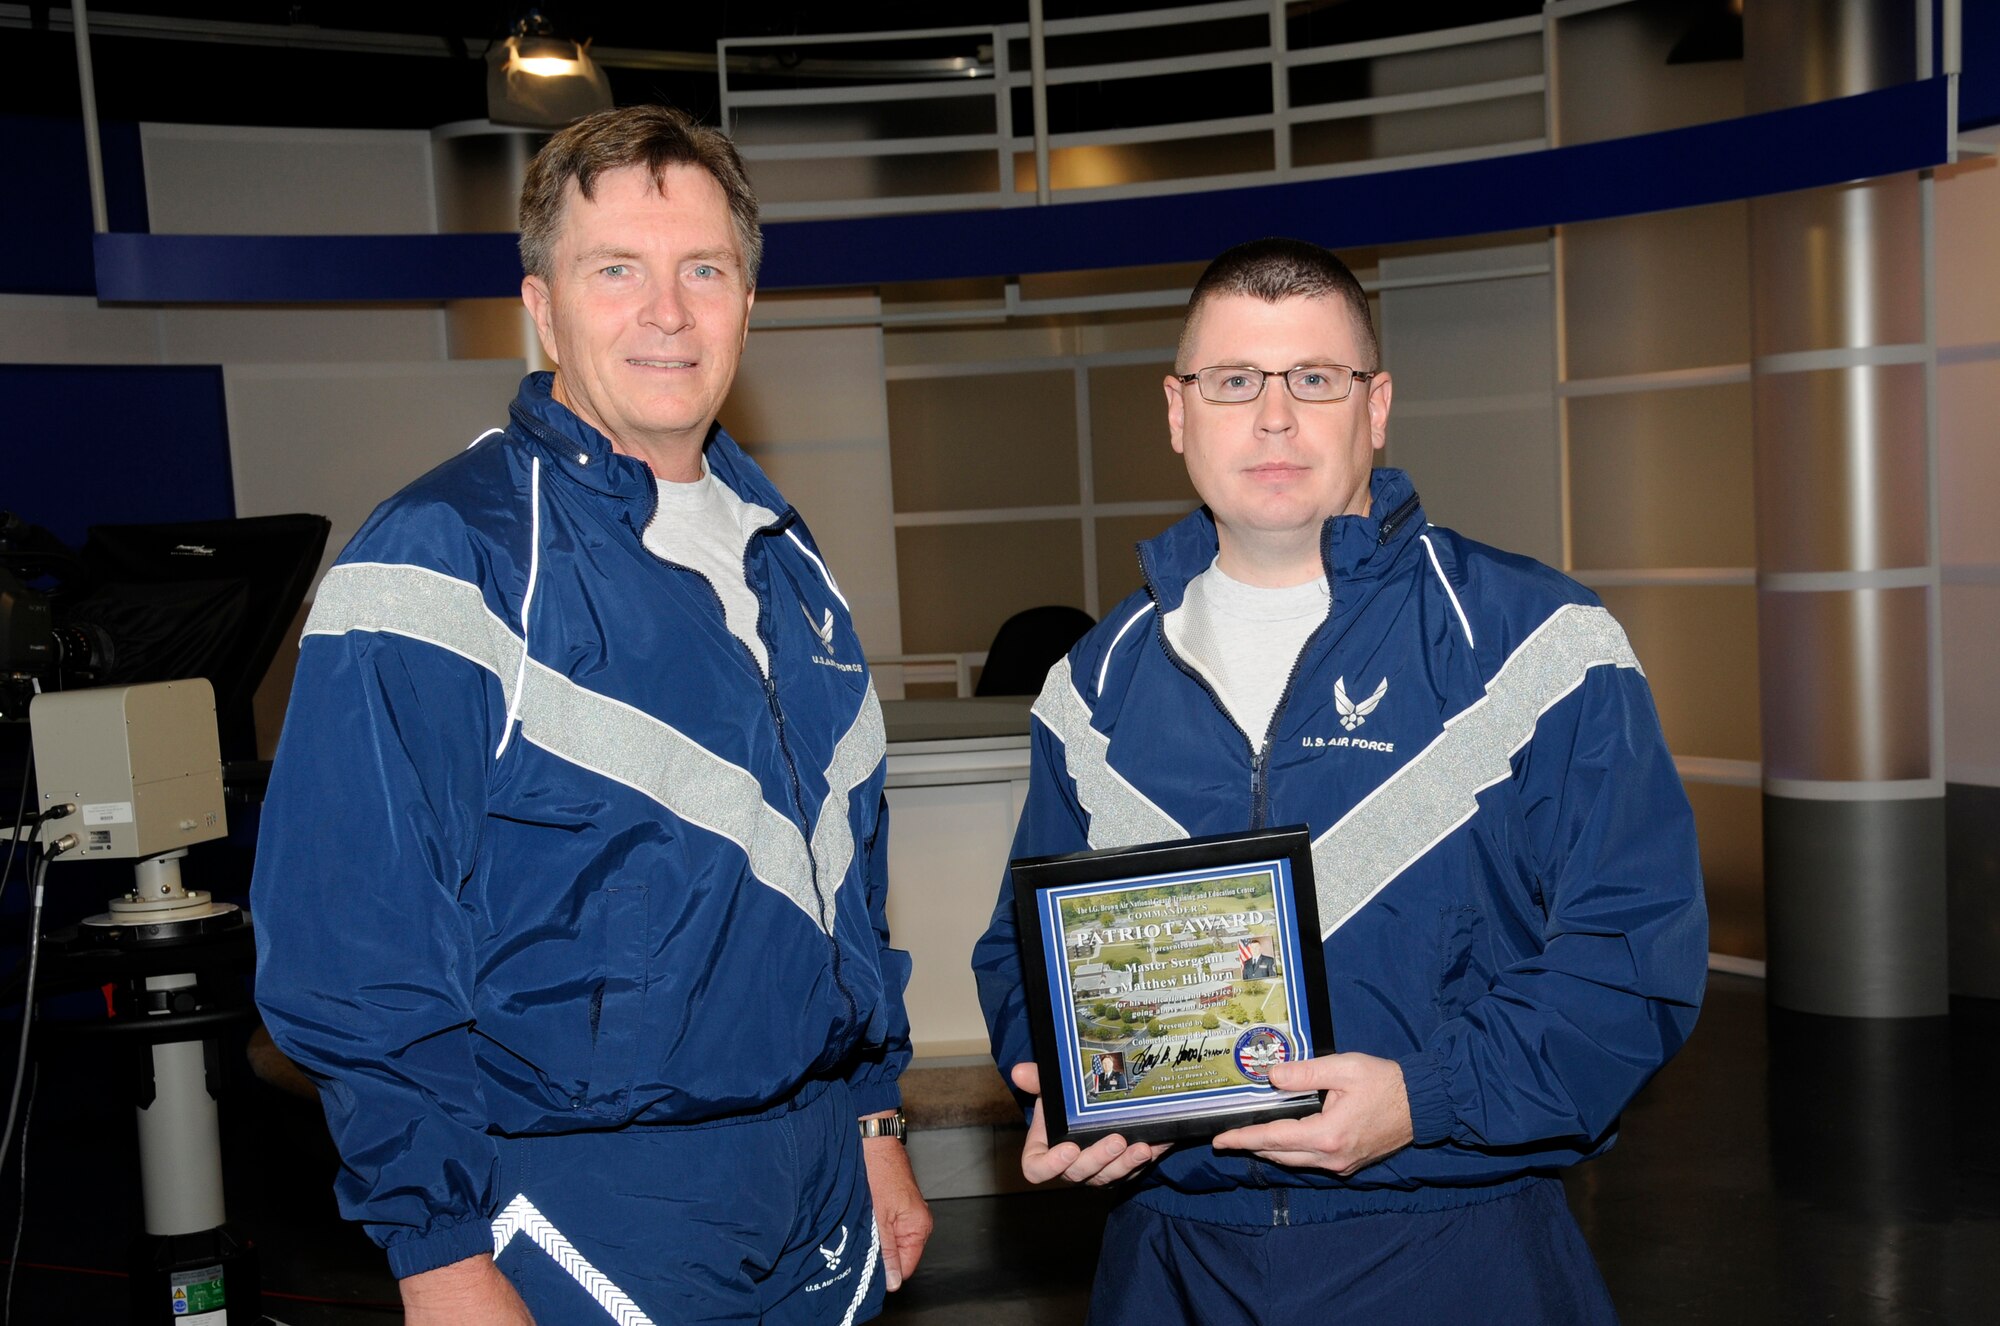 McGHEE TYSON AIR NATIONAL GUARD BASE, Tenn. - Col. Richard B. Howard, left, commander of The I.G. Brown Air National Guard Training and Education Center here, presents his Patriot Award to Master Sgt. Matt Hilborn, right, broadcast manager for the TEC-TV studios, for recognition of his contributions to the center, Nov. 24, 2010. The Patriot Award is Howard's personal award to show appreciation for those he feels have gone above and beyond in their service. (U.S. Air Force photo by Master Sgt. Kurt Skoglund/Released)